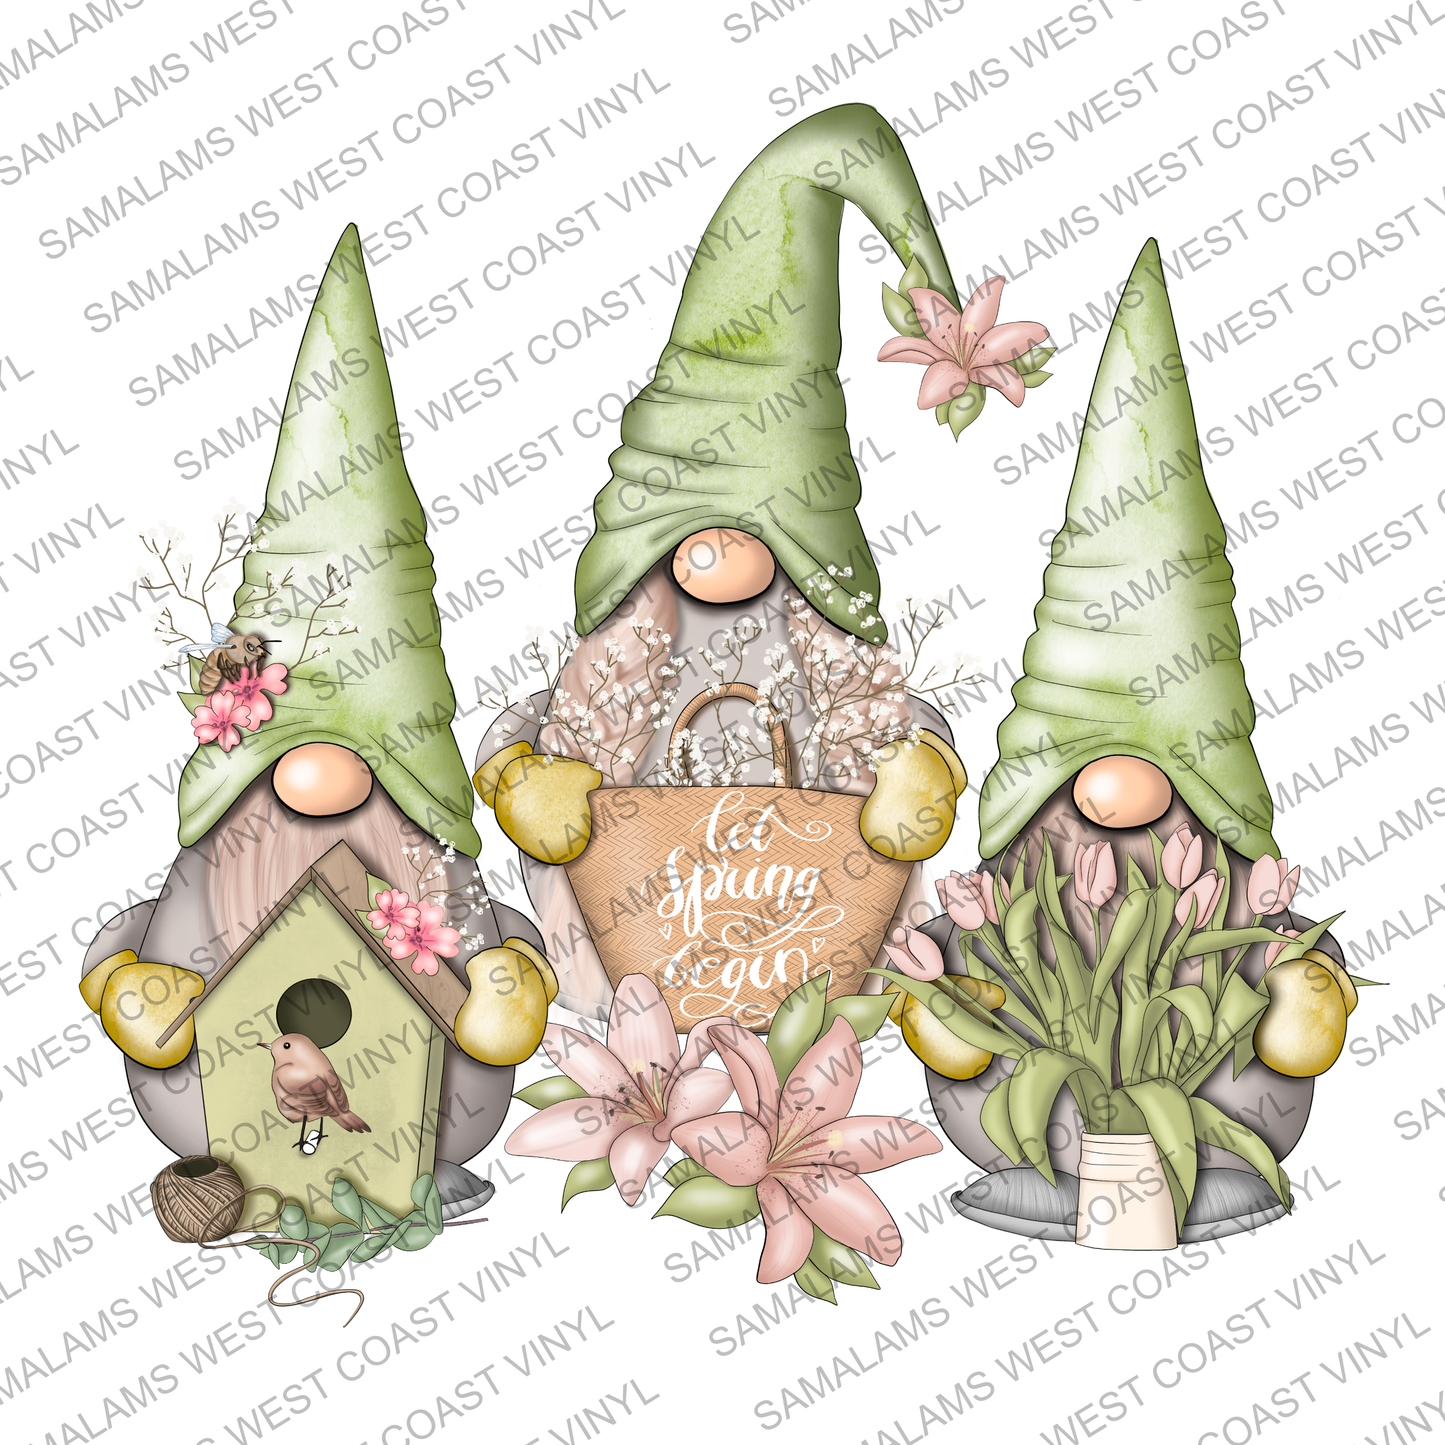 Gnomes - Pack 1